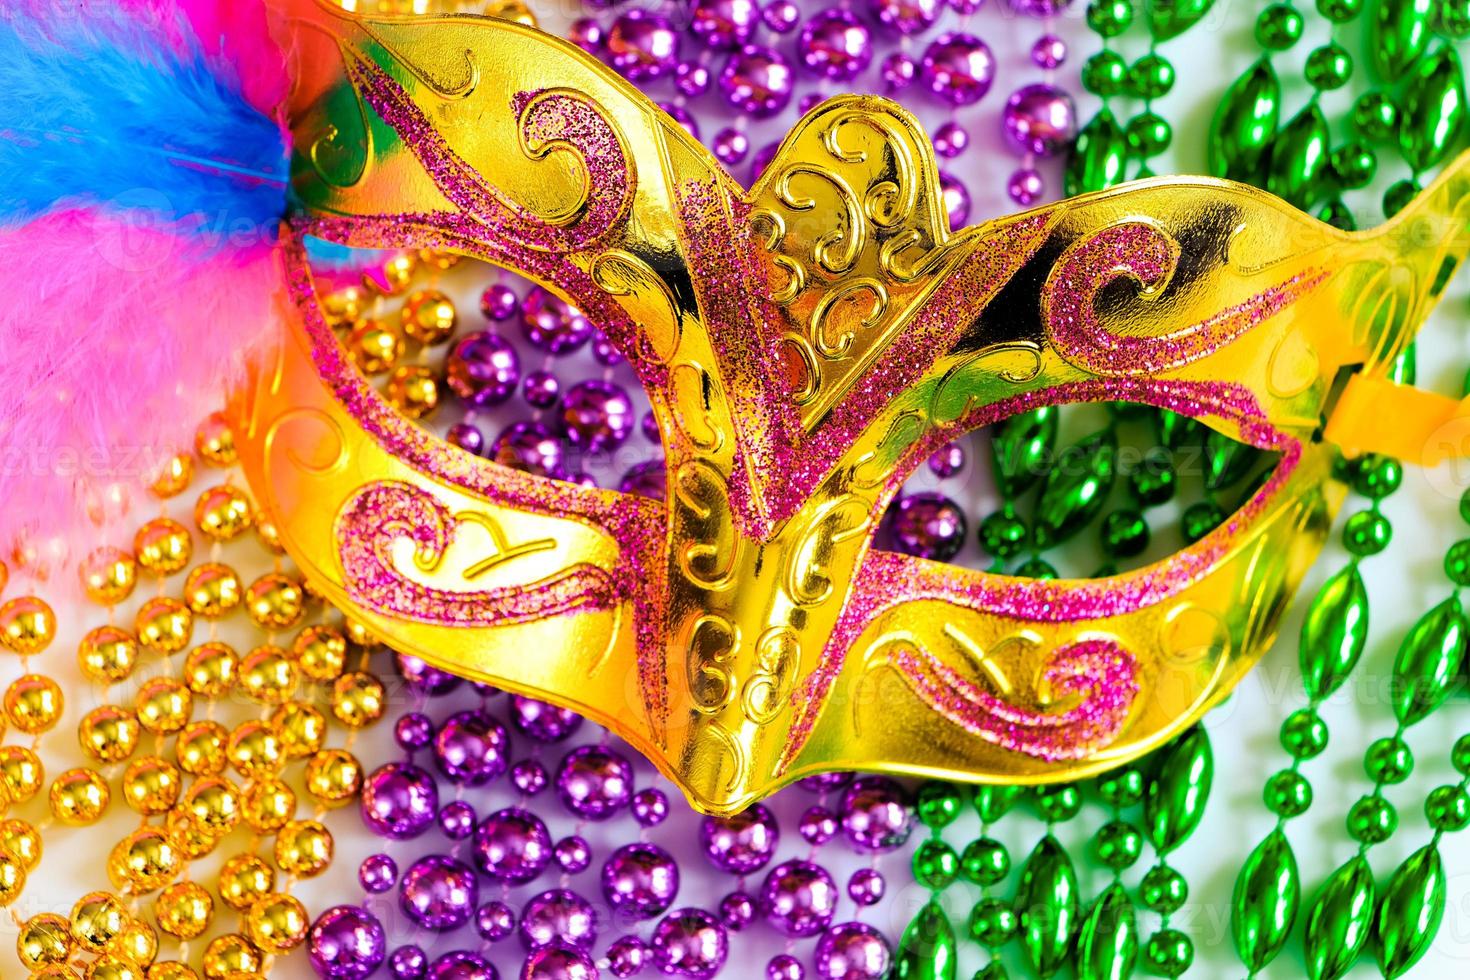 https://static.vecteezy.com/system/resources/previews/006/173/630/non_2x/golden-carnival-mask-and-colorful-beads-photo.jpg